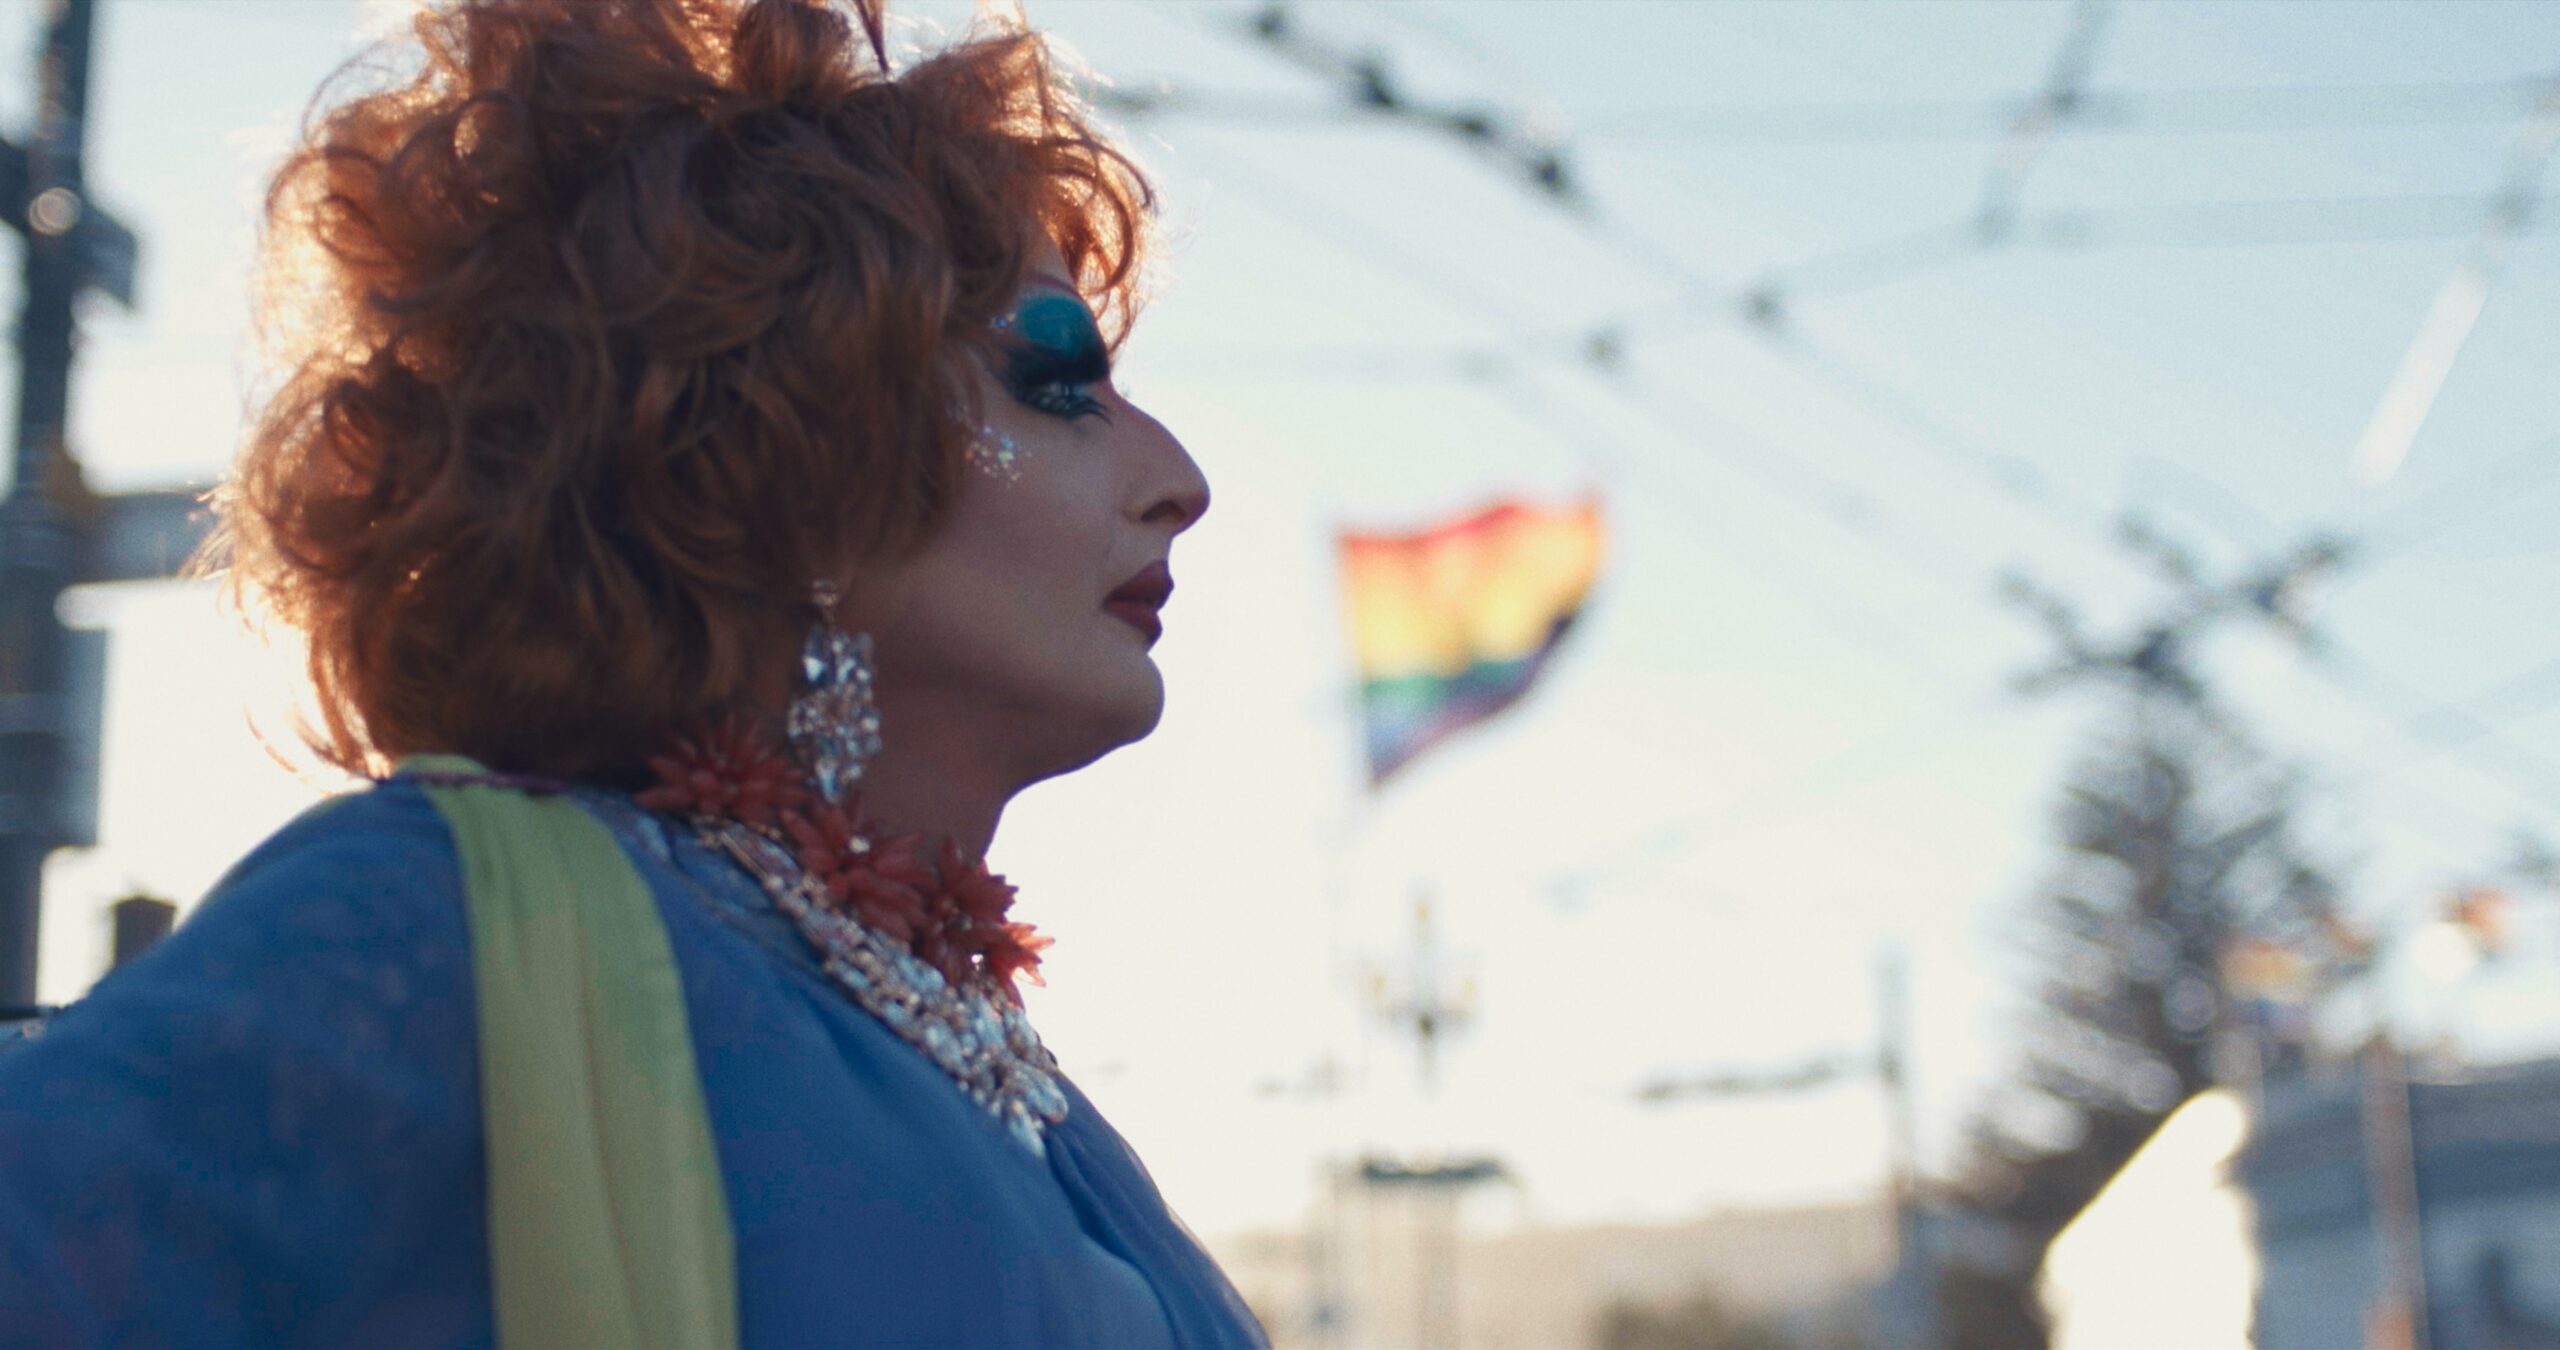 ‘Last Dance’ Tracks the Willful Destruction of a Drag Queen’s Persona